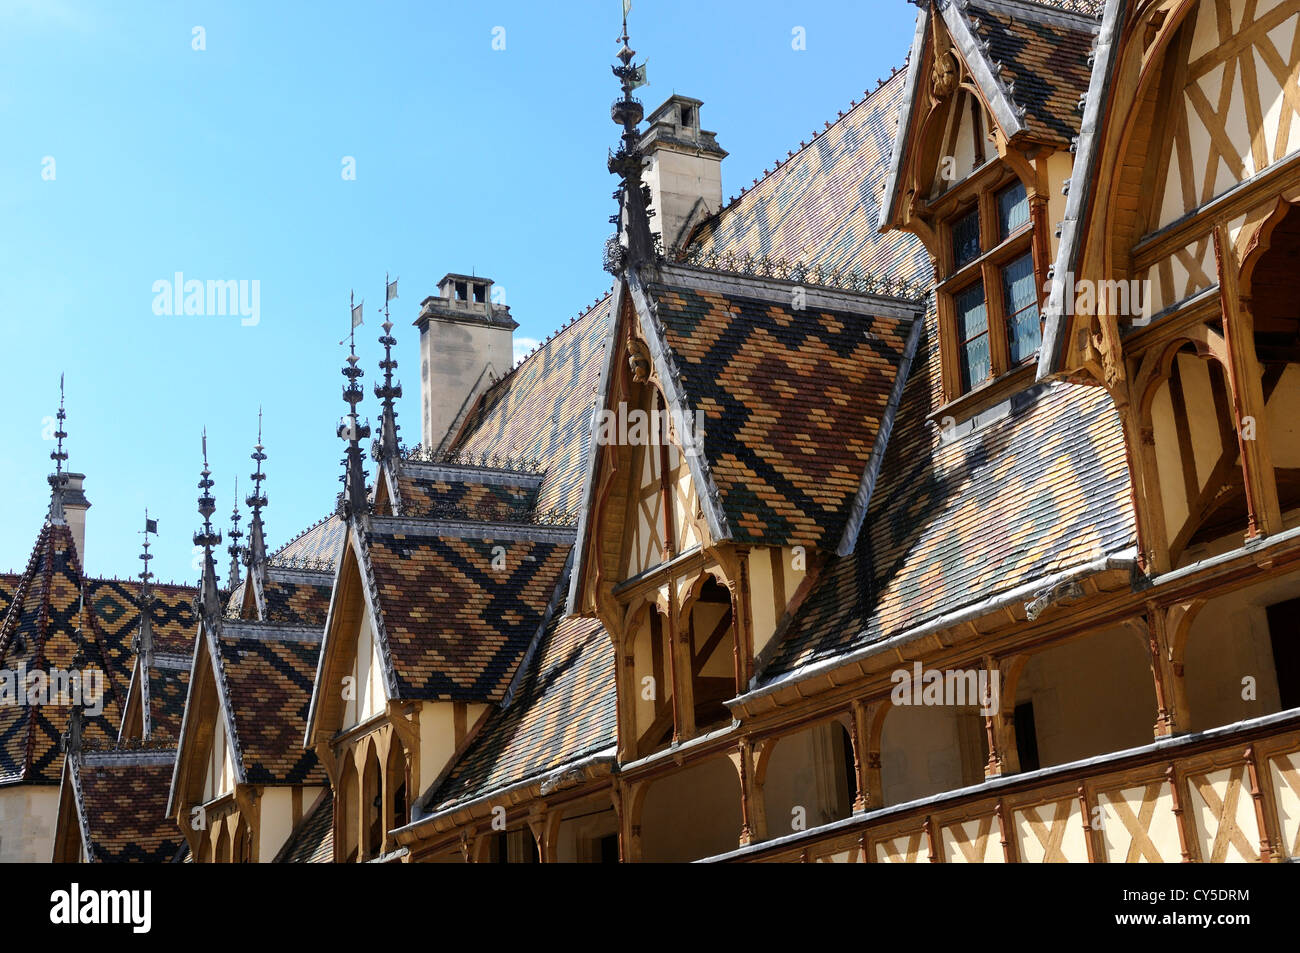 Beaune, Hospices de Beaune, Hotel Dieu, roof in varnished tiles multicolored in courtyard. Cote d'Or. Bourgogne Franche Comte. France Stock Photo